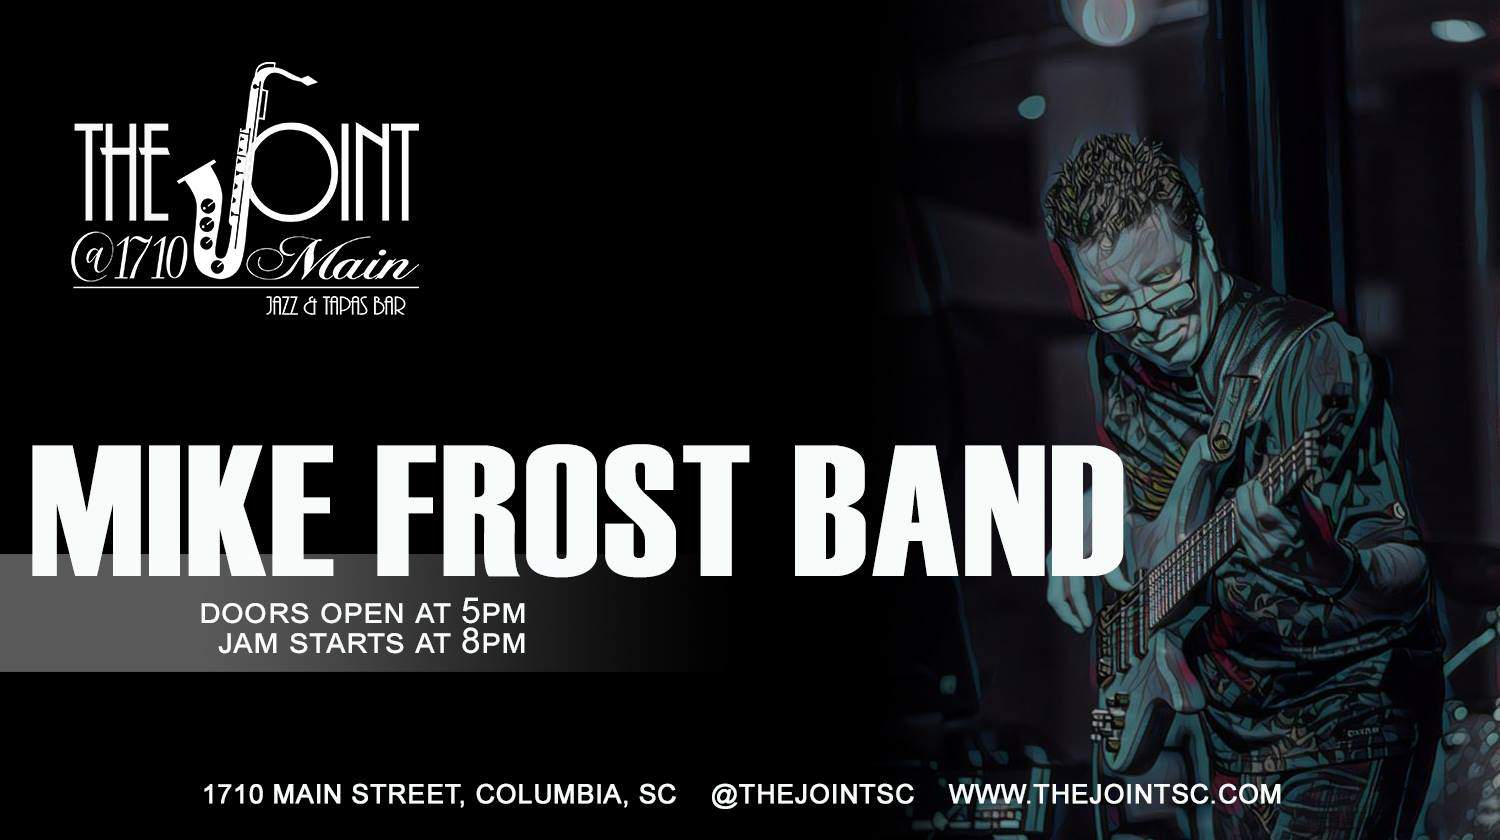 Mike Frost Band